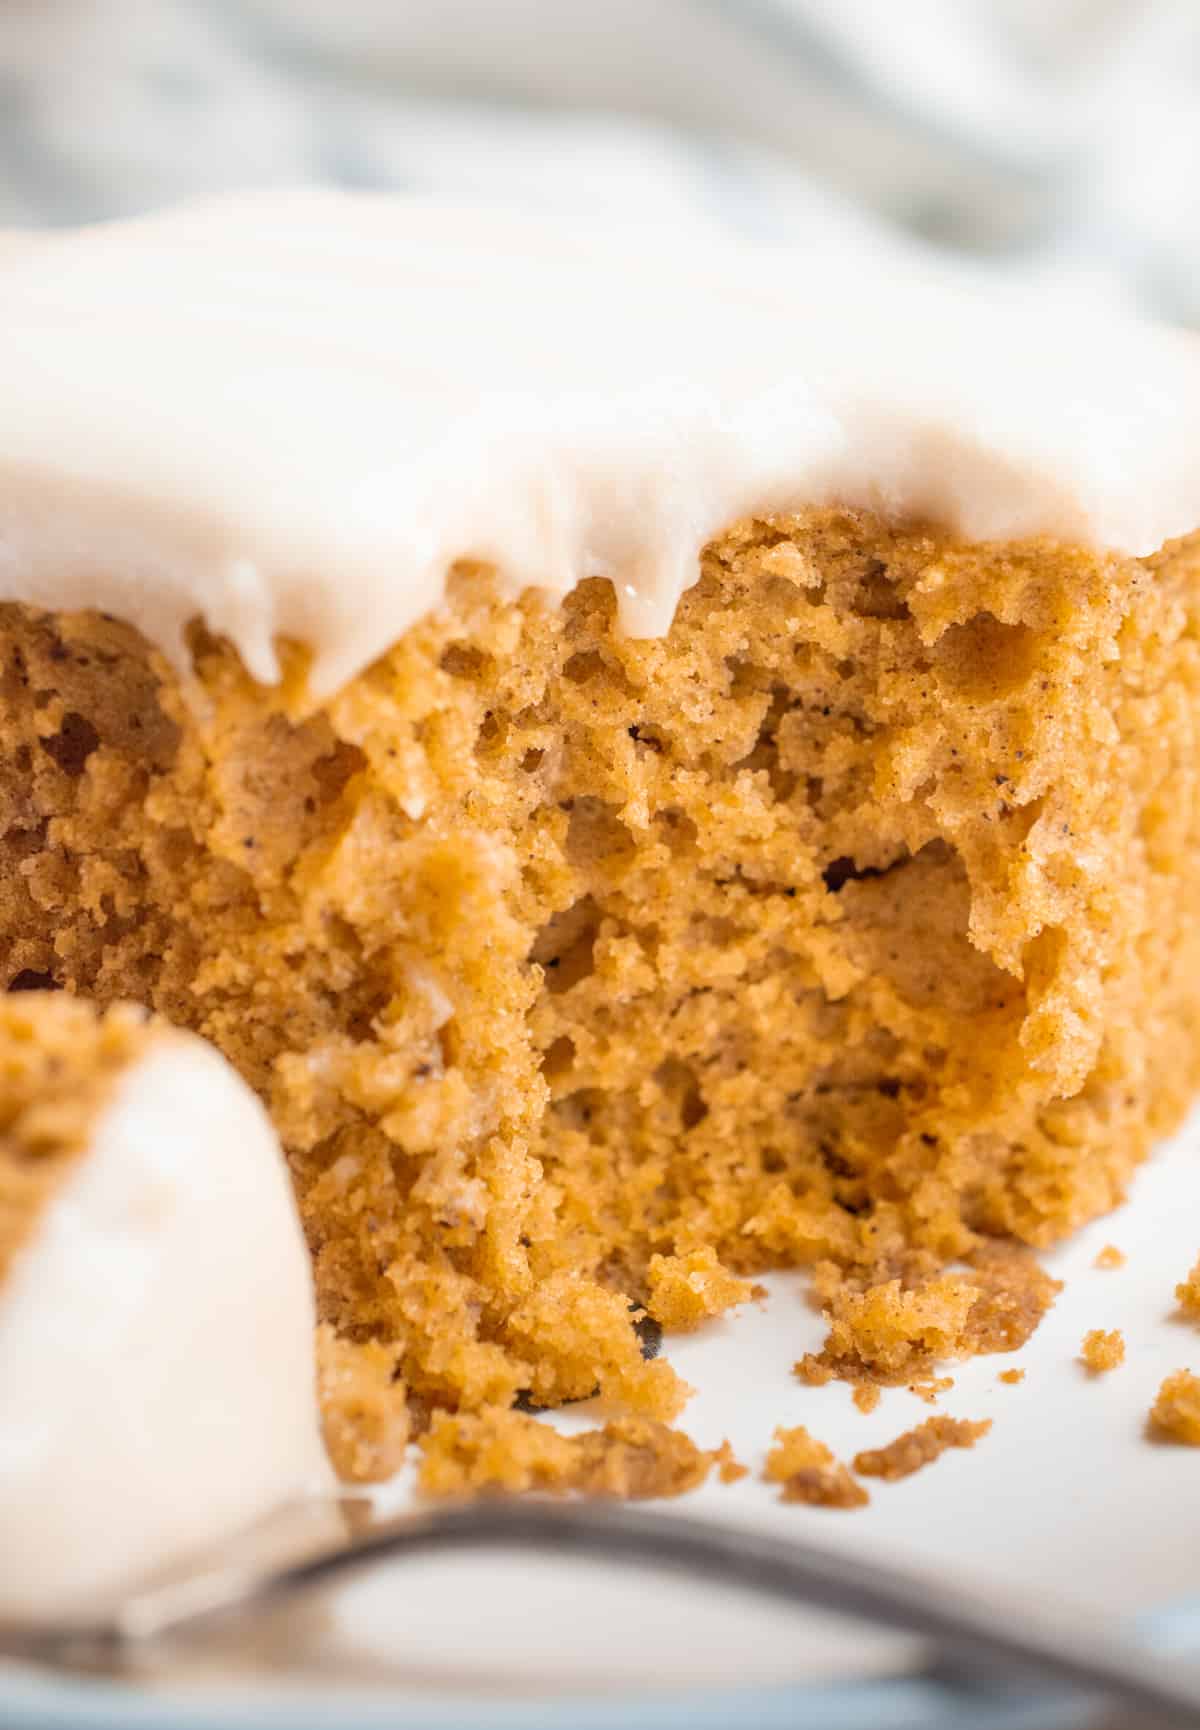 A slice of vegan pumpkin cake with a bite removed.